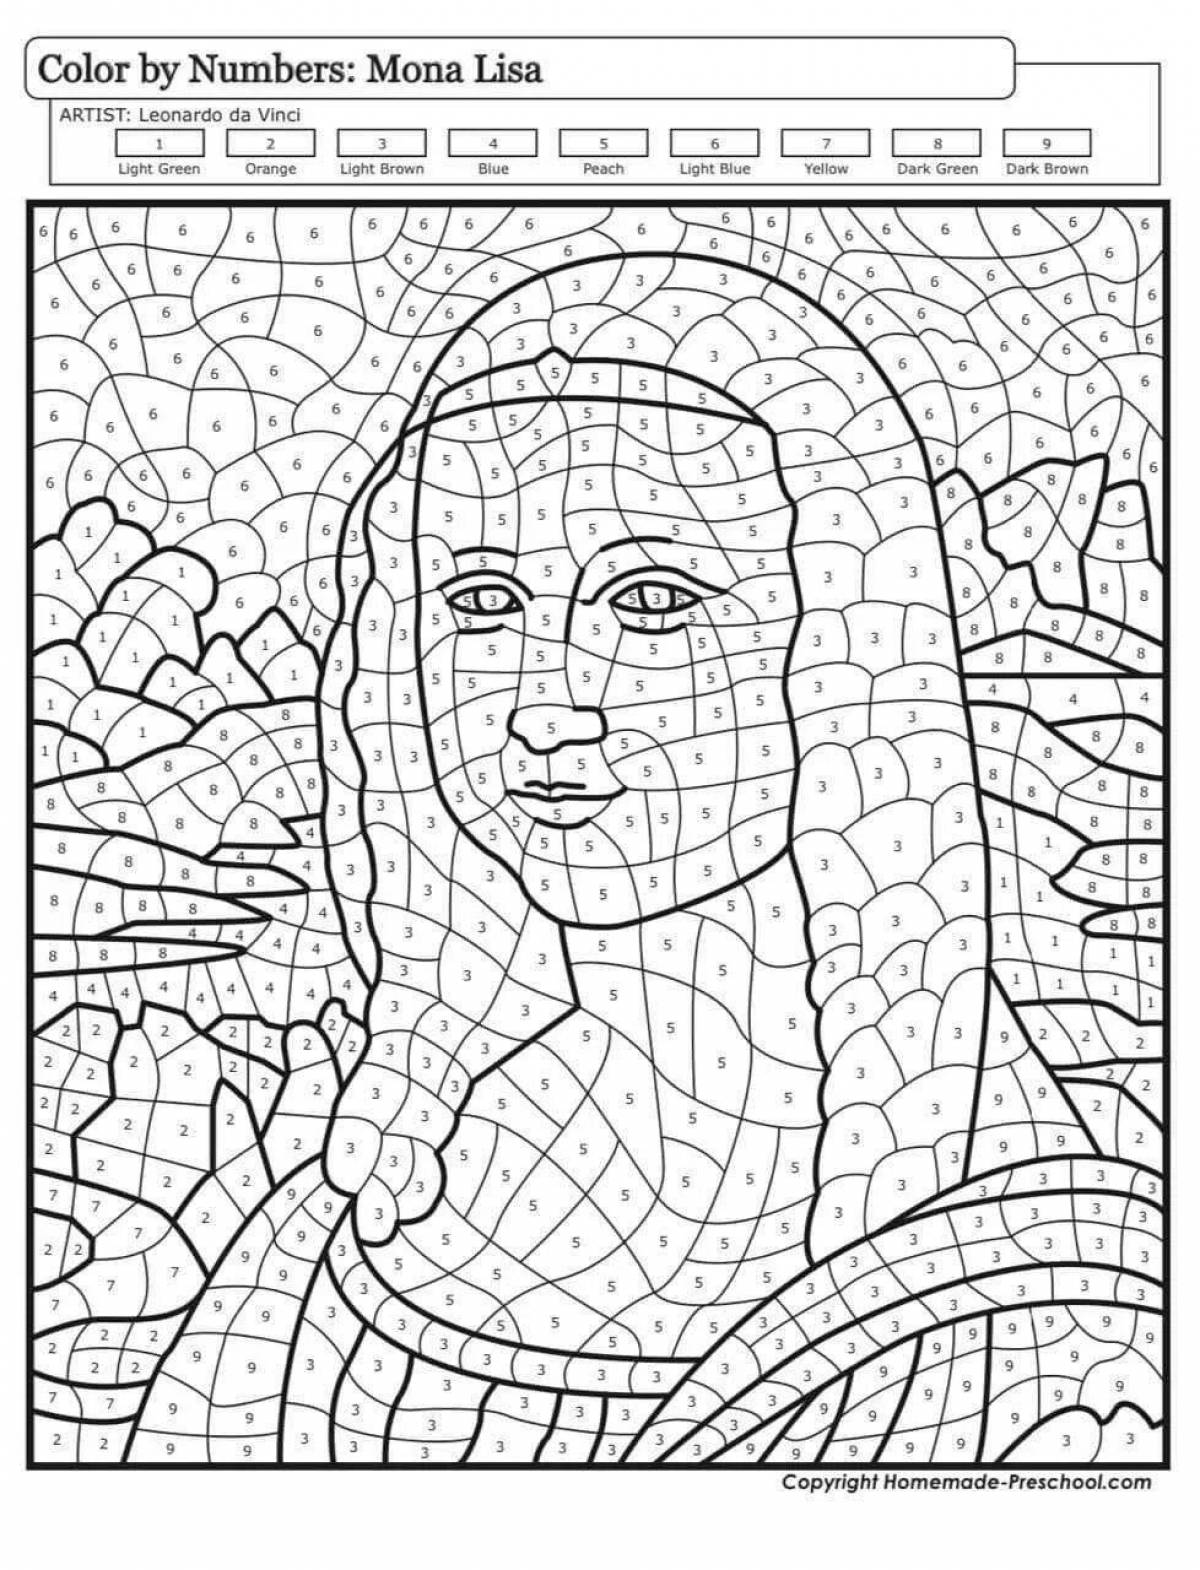 Mona lisa deluxe coloring book